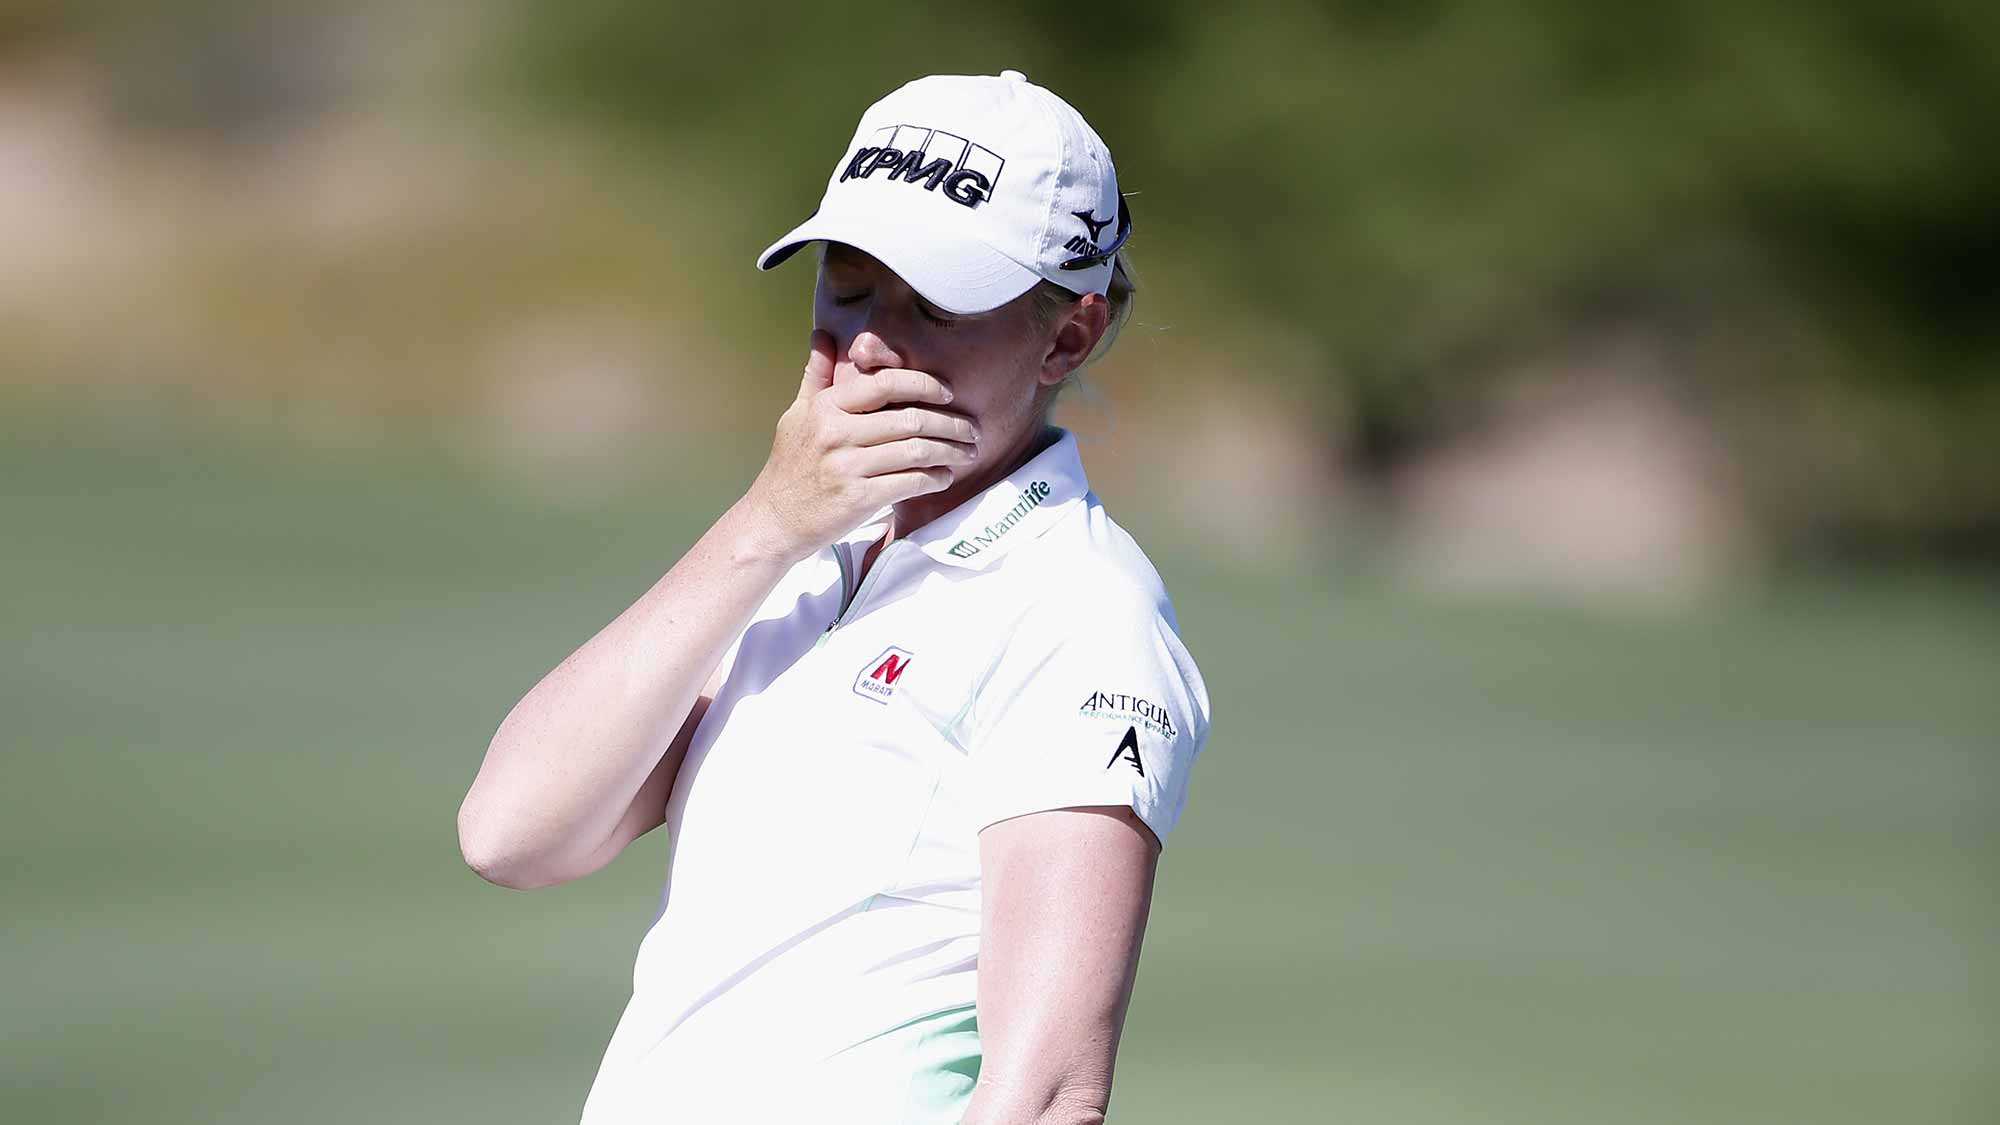 Stacy Lewis reacts after a missed putt on the 7th green during the final round of the LPGA JTBC Founders Cup at Wildfire Golf Club